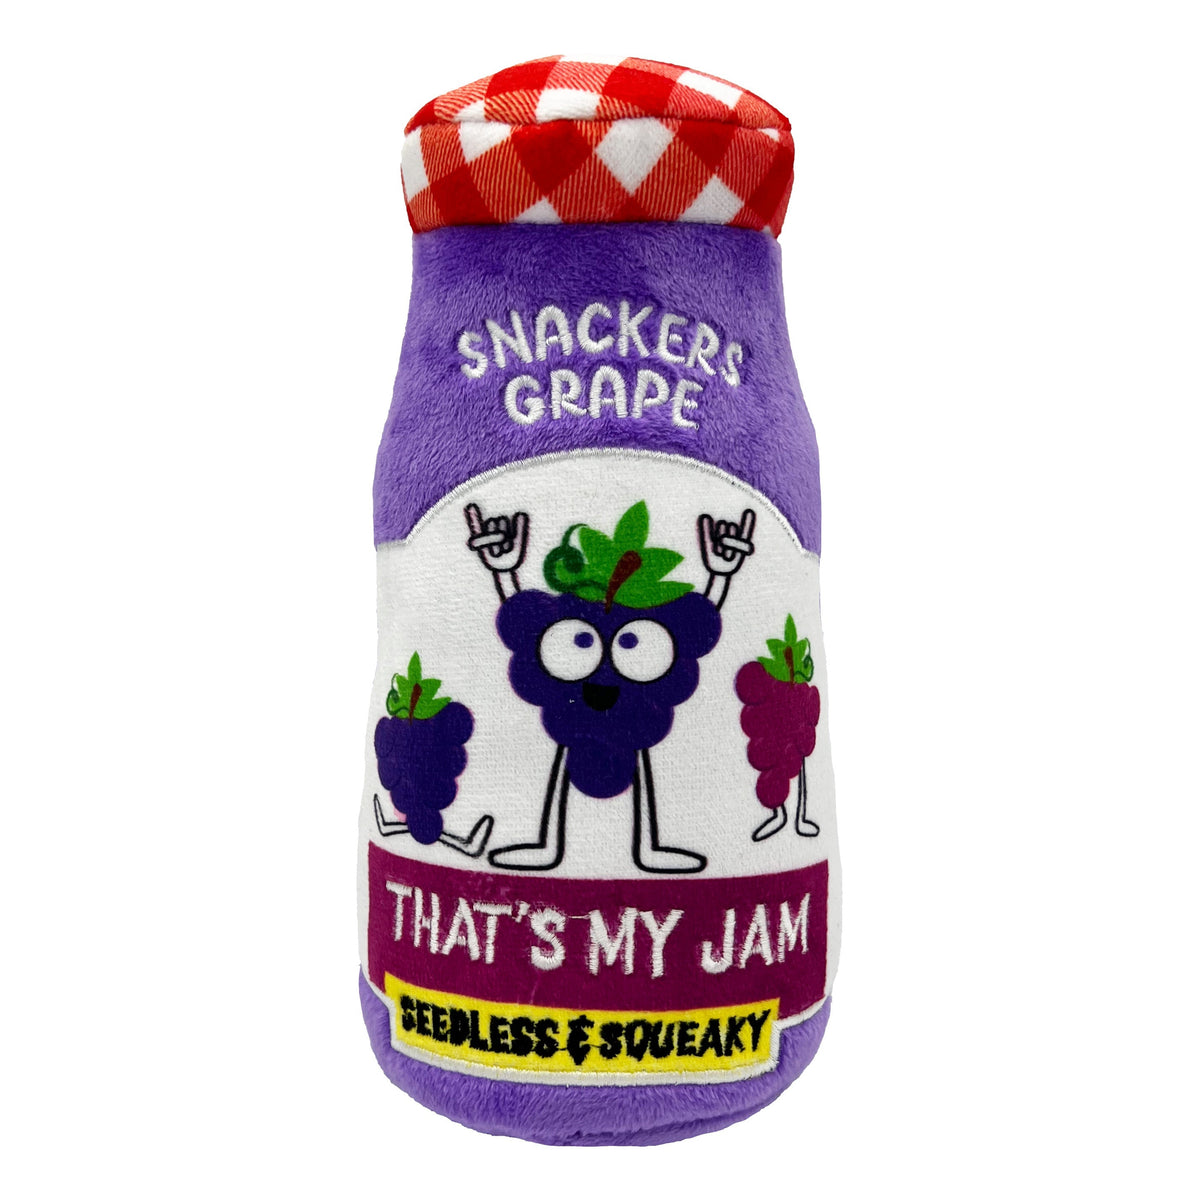 Snackers Grape Jam (Double Sided)